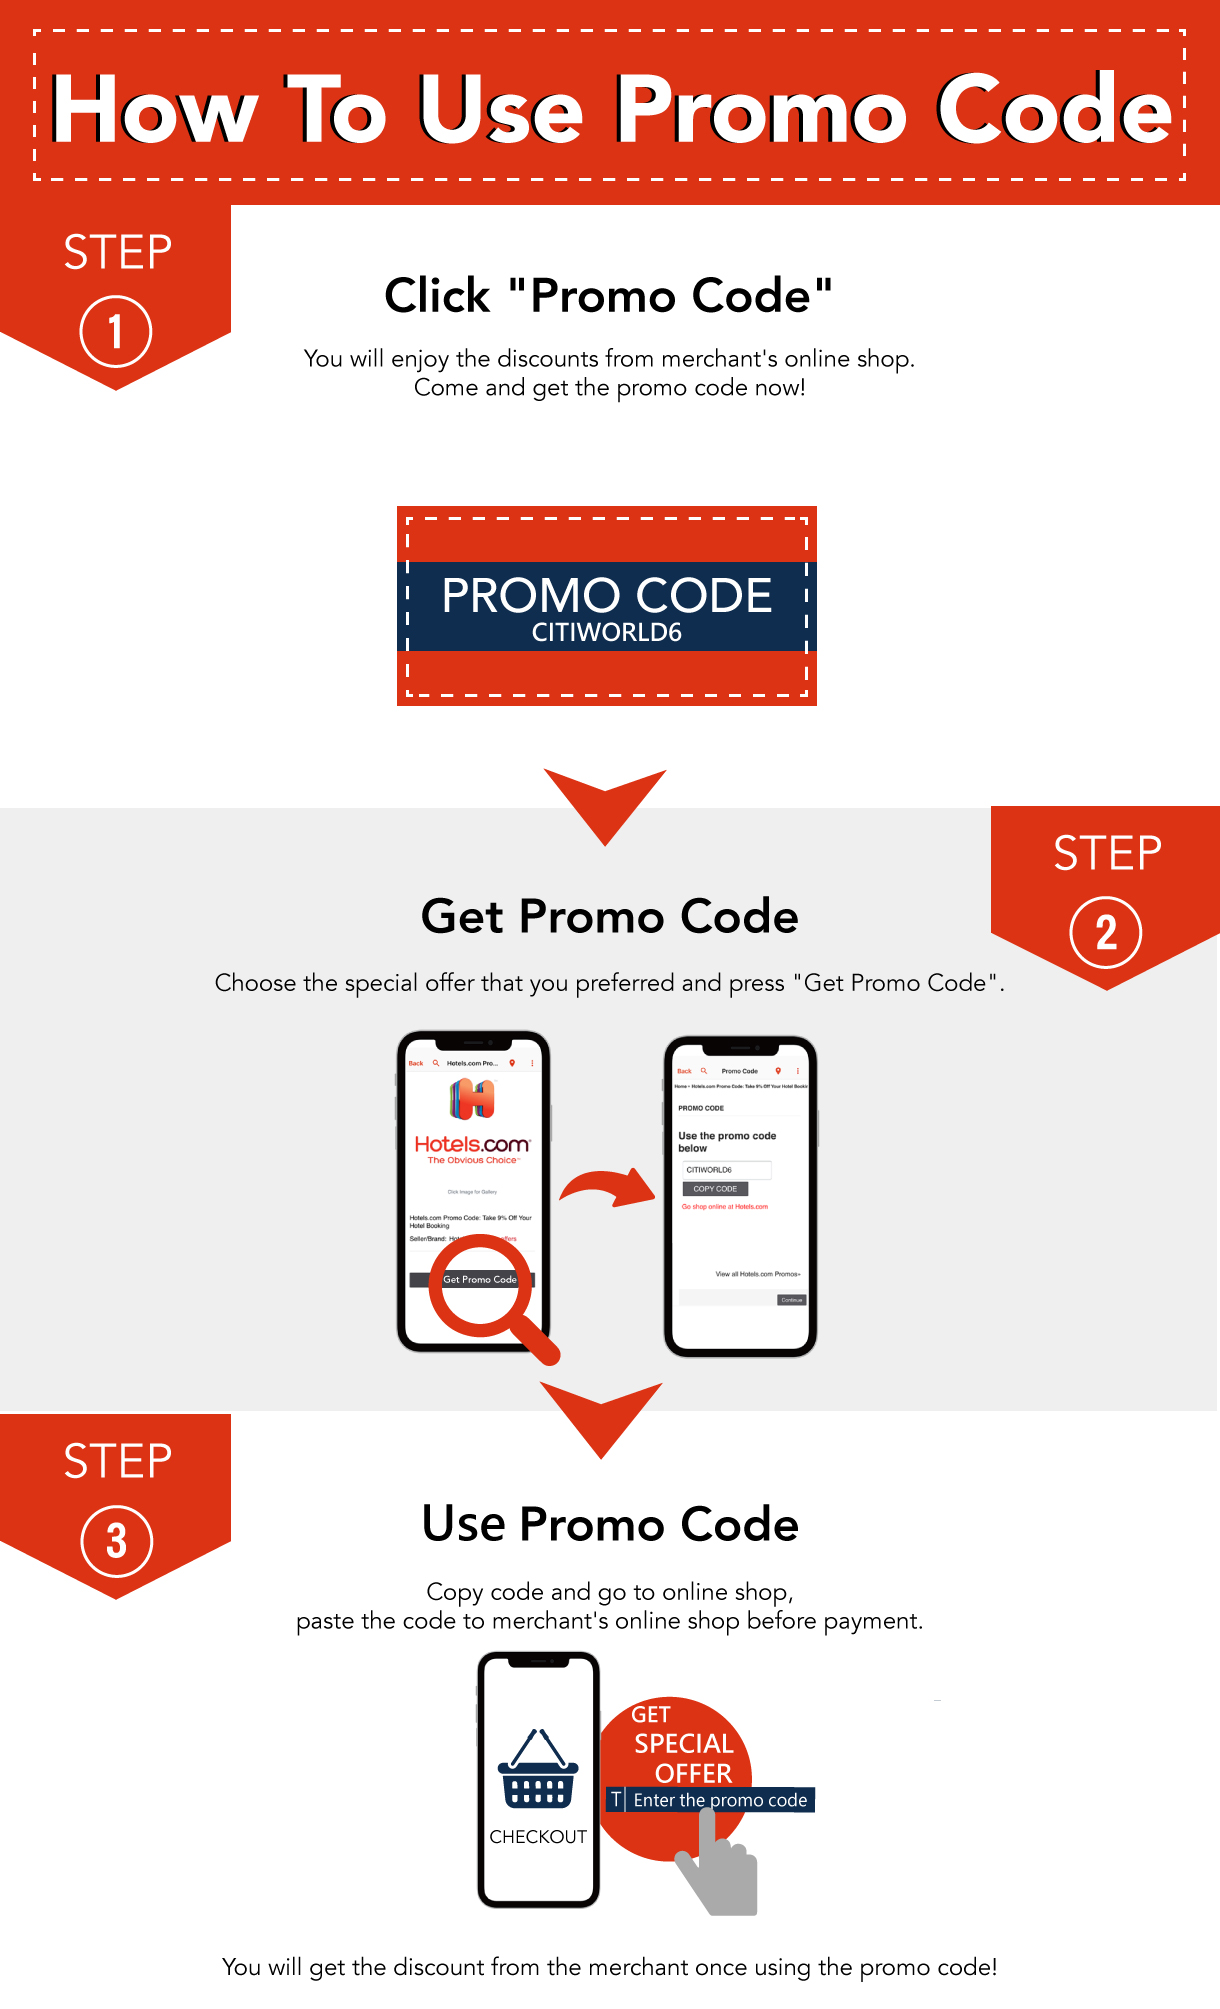 How to use PROMO CODE